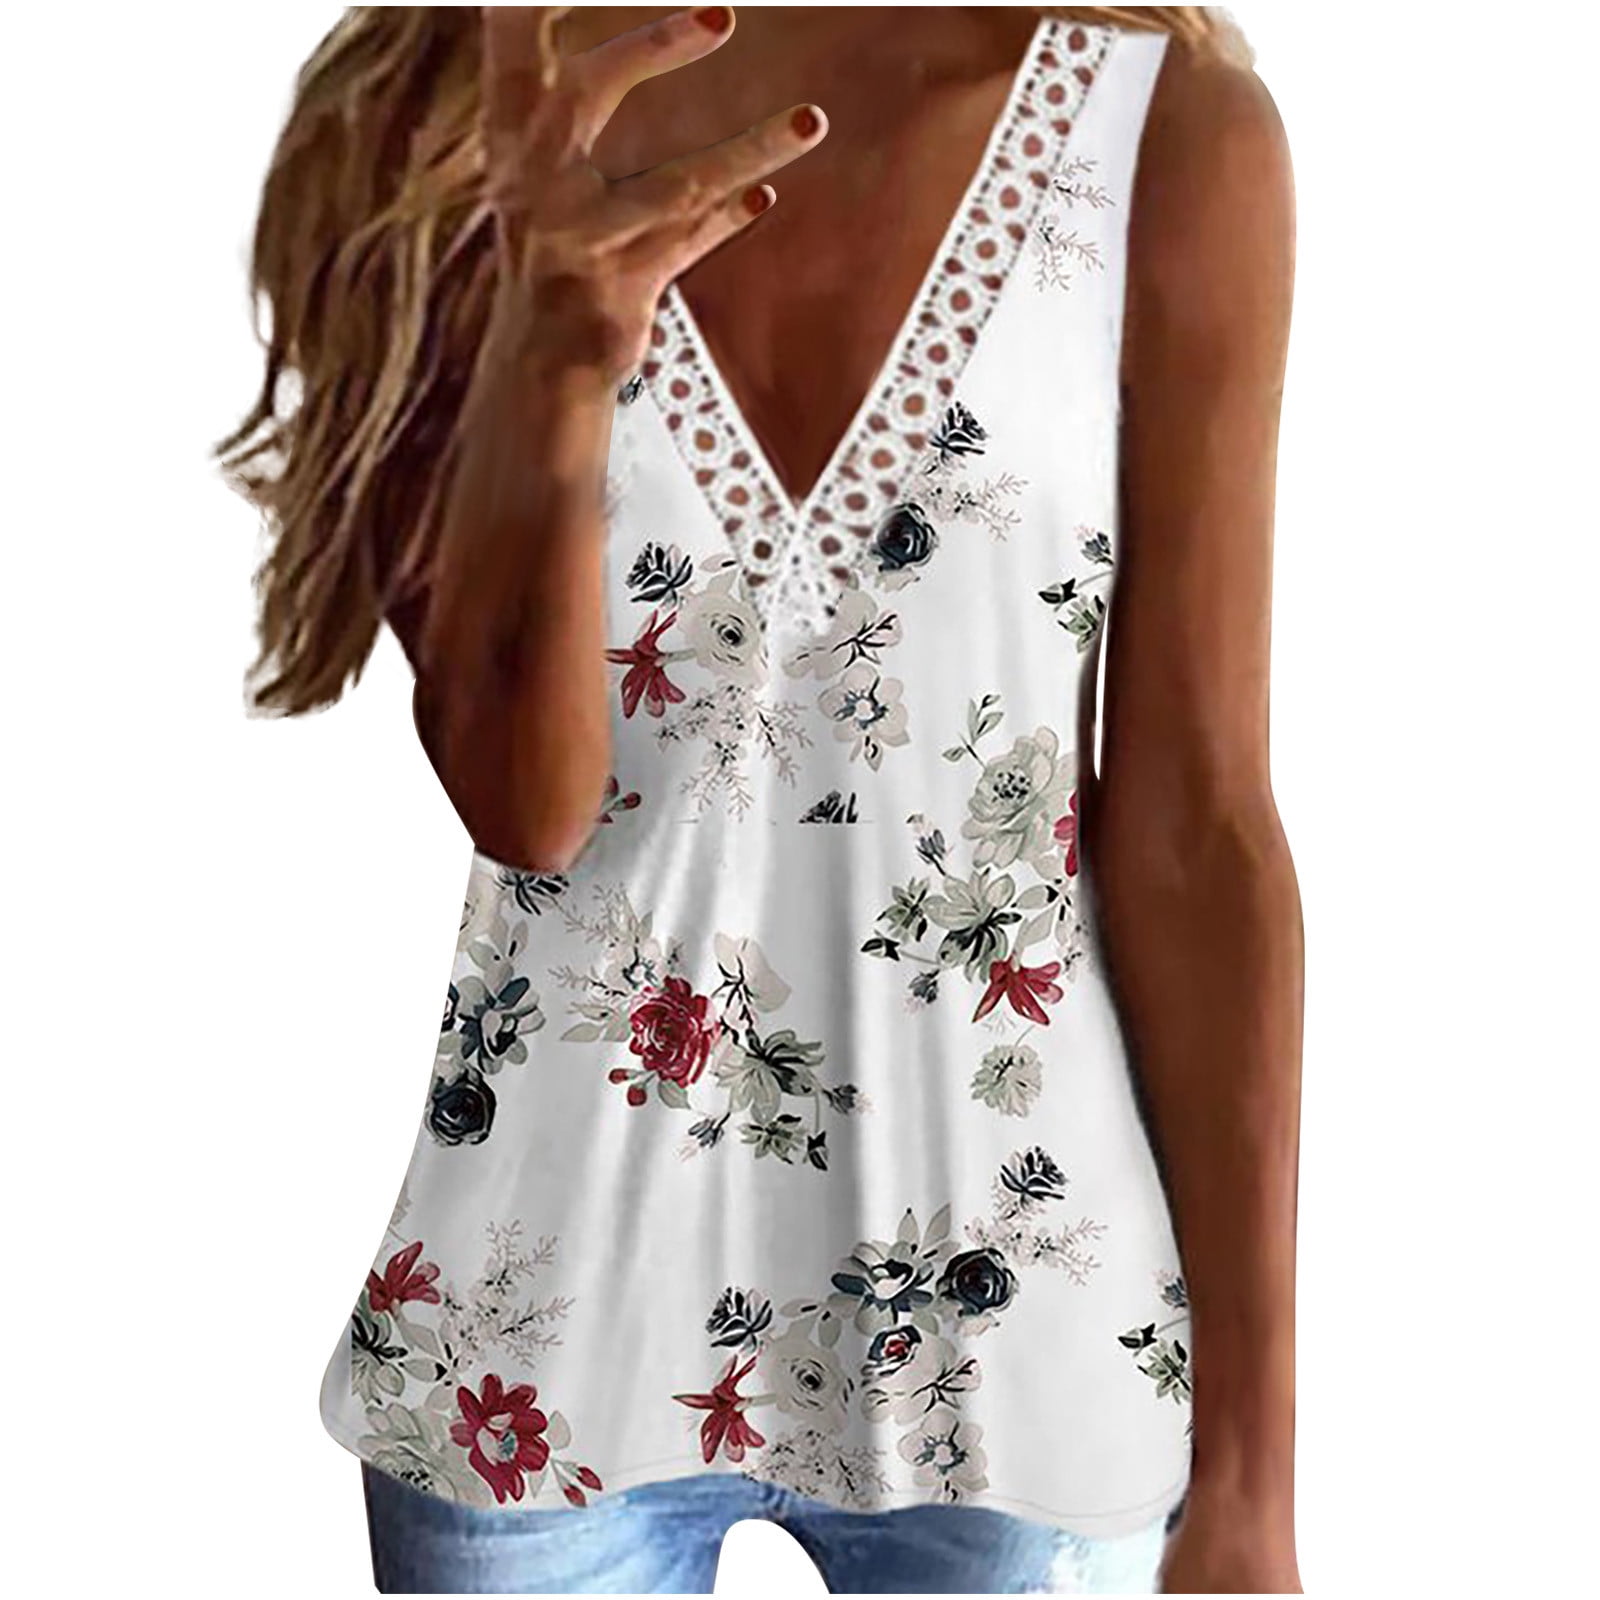 Baiggooswt 2019 Summer New Women Solid Sleeveless Fashion Top V-Neck Vest Tank Shirt Blouse Tops 